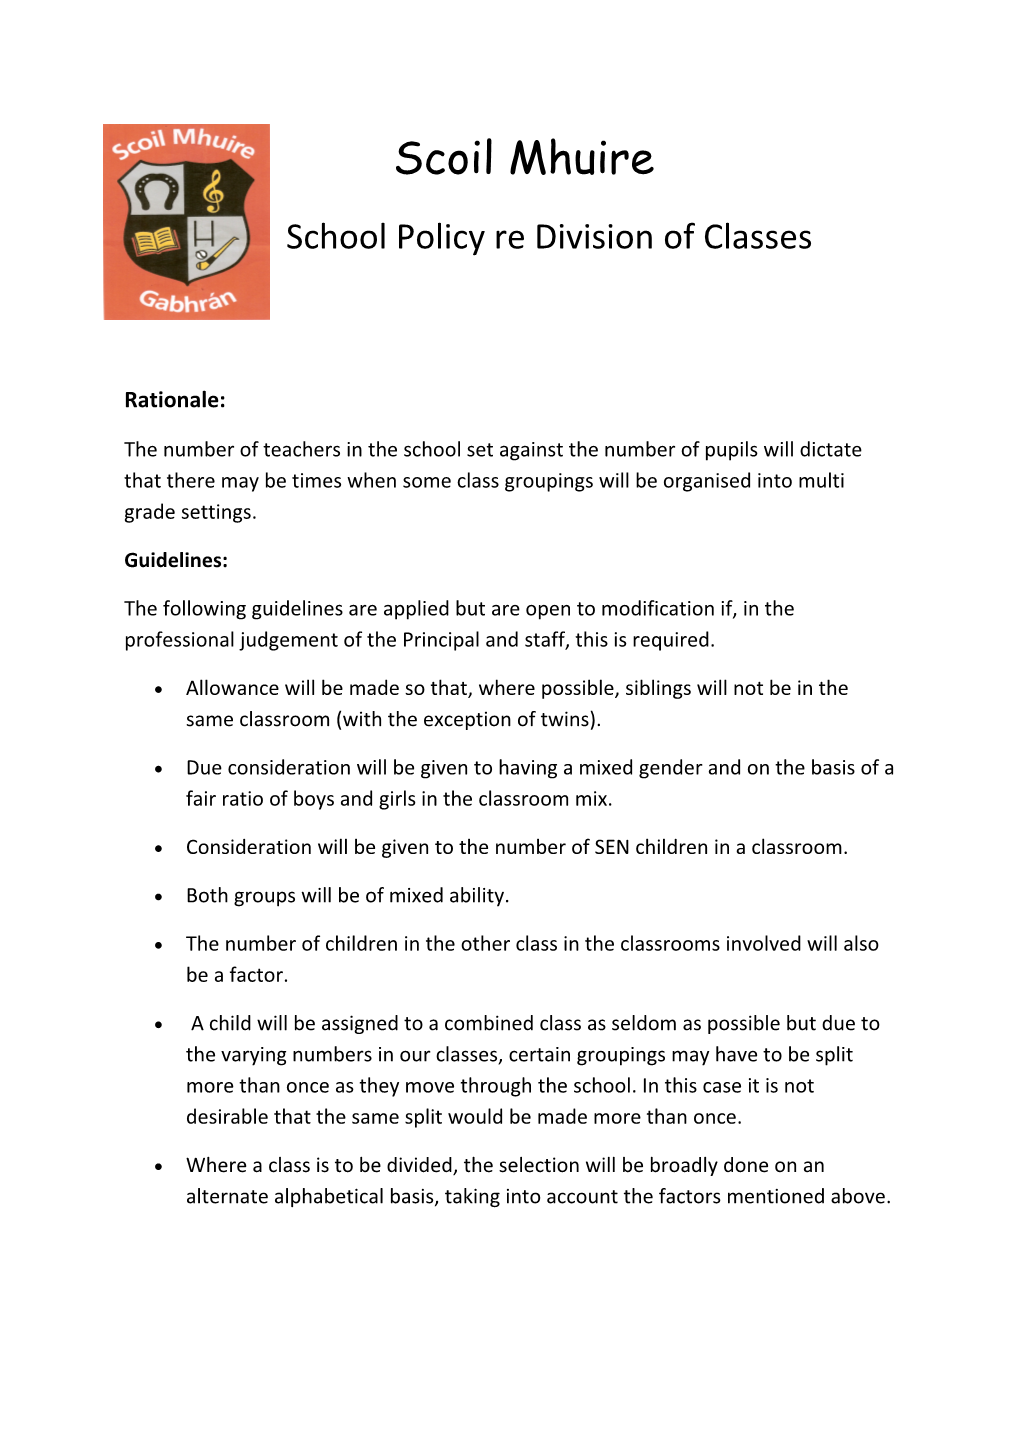 School Policy Re Division of Classes